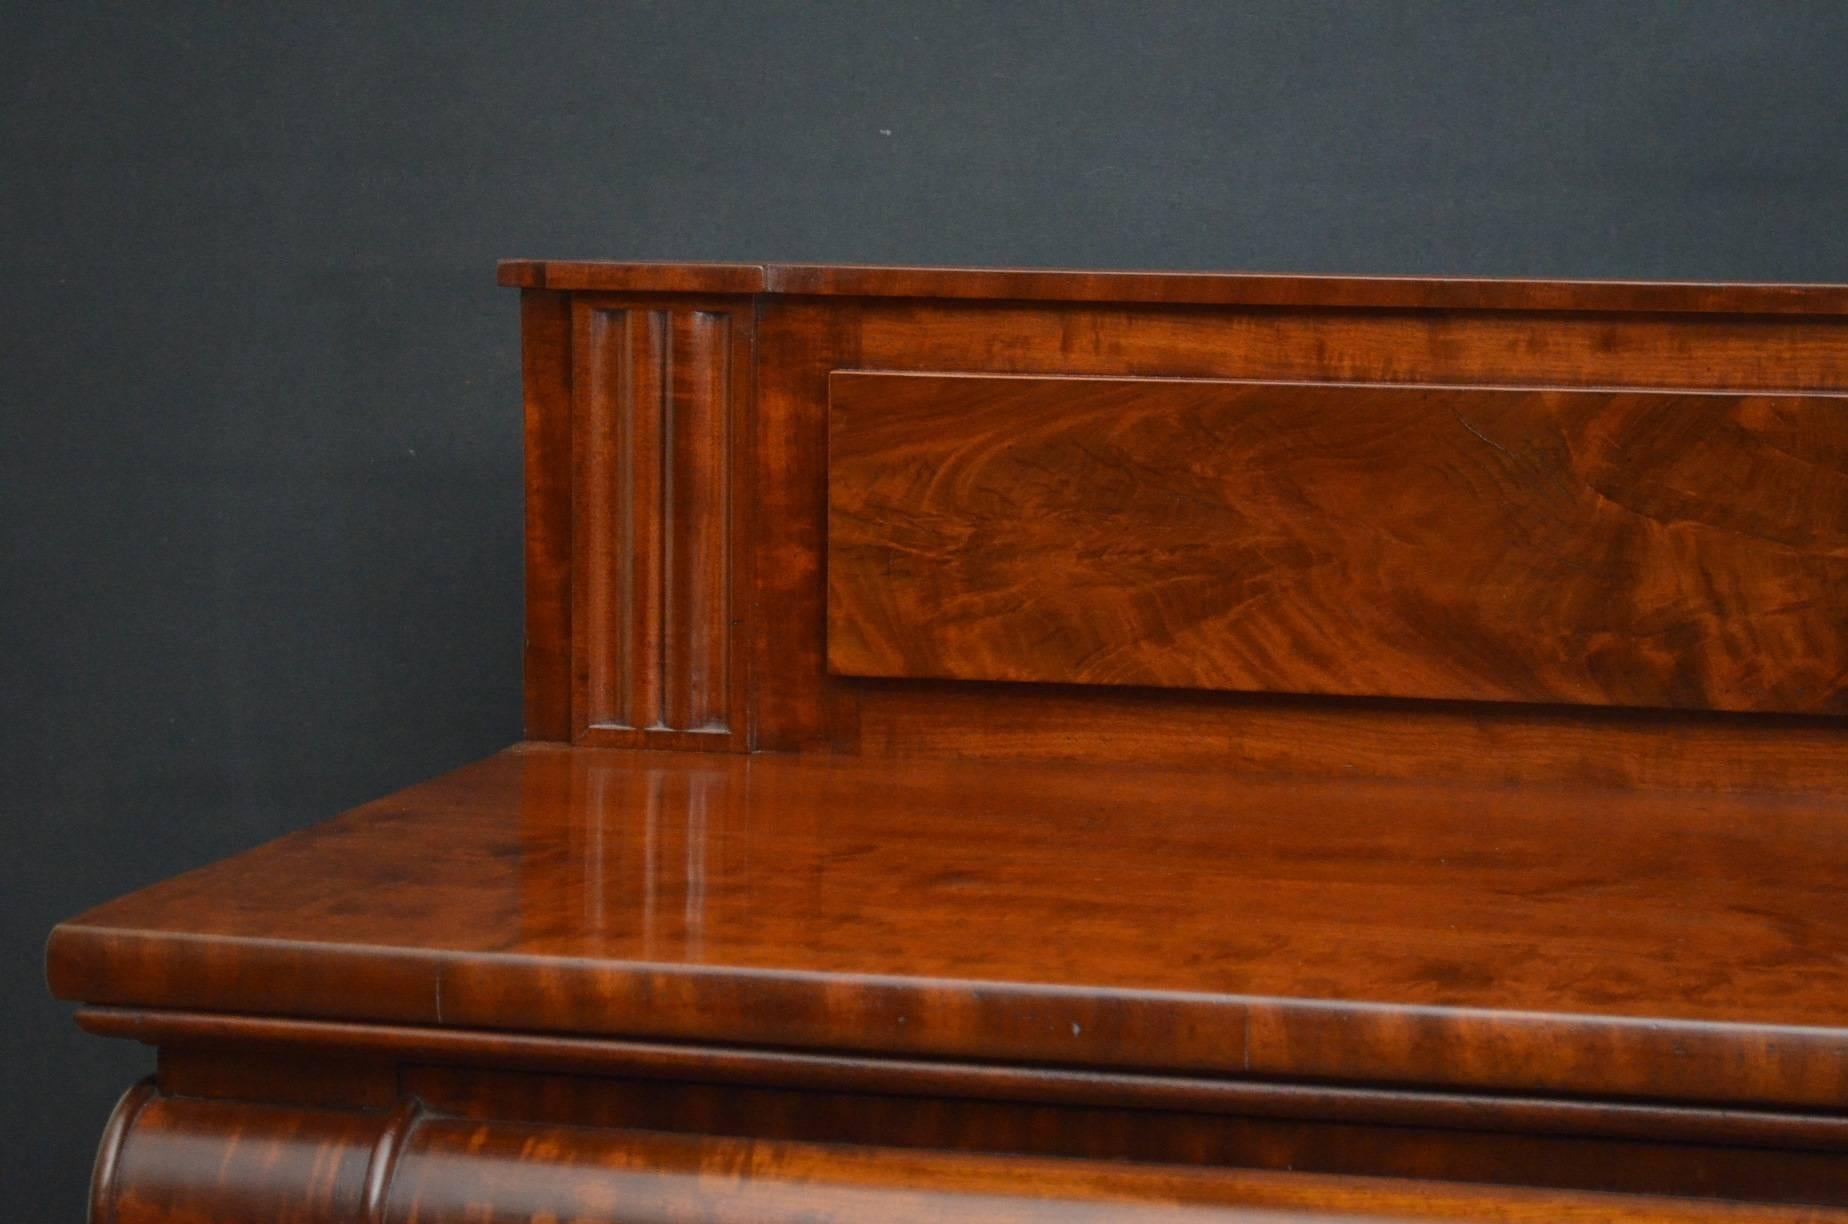 Sn3890, a striking, William IV, mahogany hall table, having flamed mahogany, fielded upstand with flanked by fluted decoration and stunning figured mahogany top above two cylindrical drawers, all raised on beautifully carved legs terminating in paw